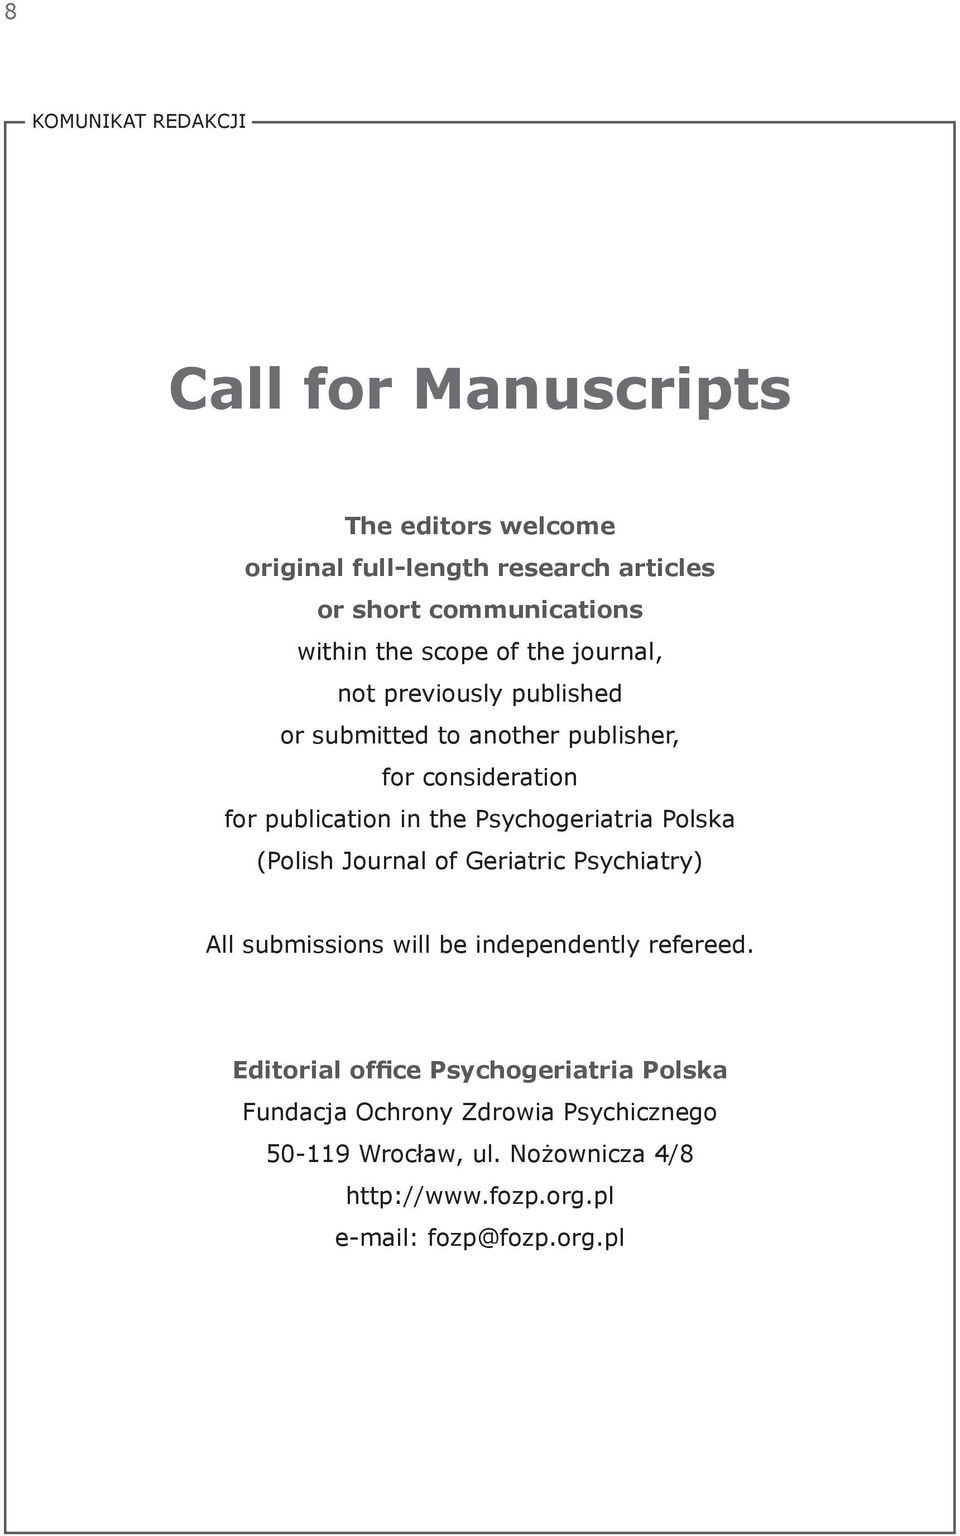 Psychogeriatria Polska (Polish Journal of Geriatric Psychiatry) All submissions will be independently refereed.